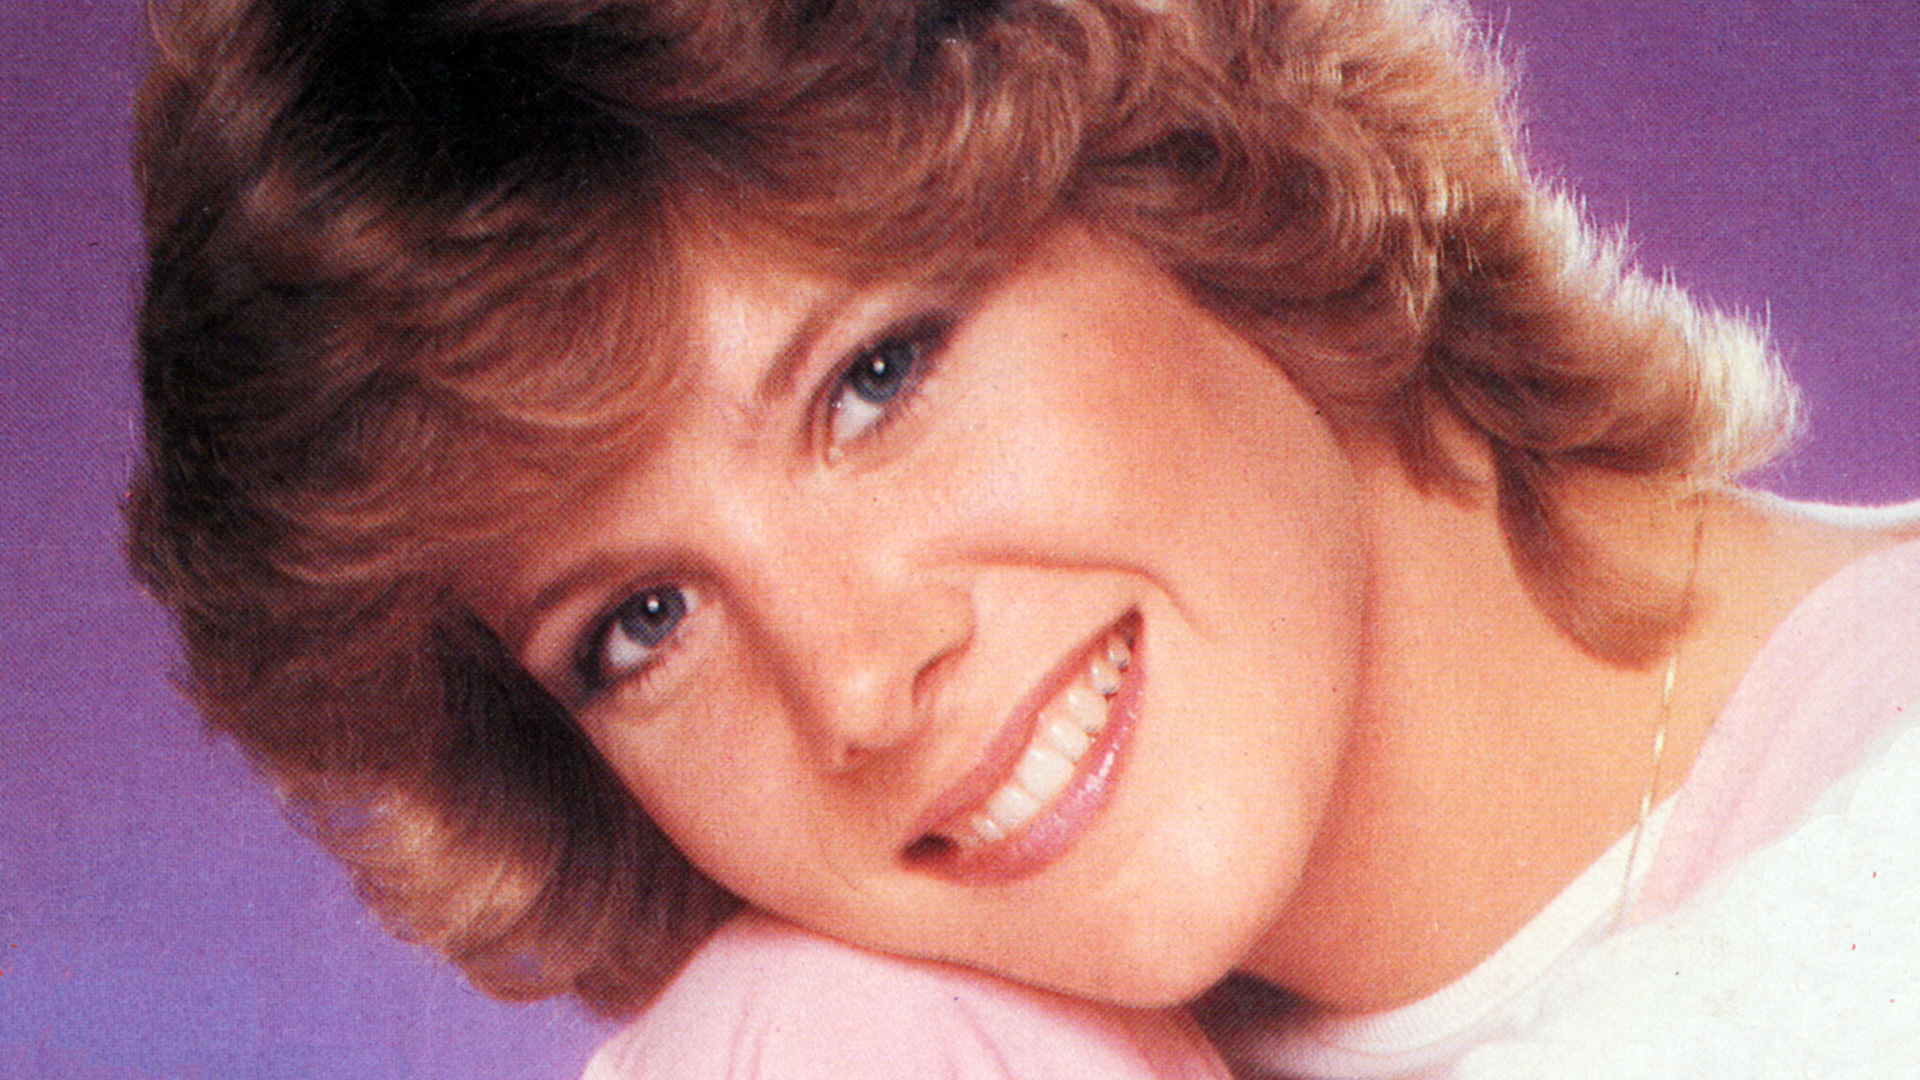 February 23, 1978:  Debby Boone’s “You Light Up My Life” Won Best Song at the Grammys